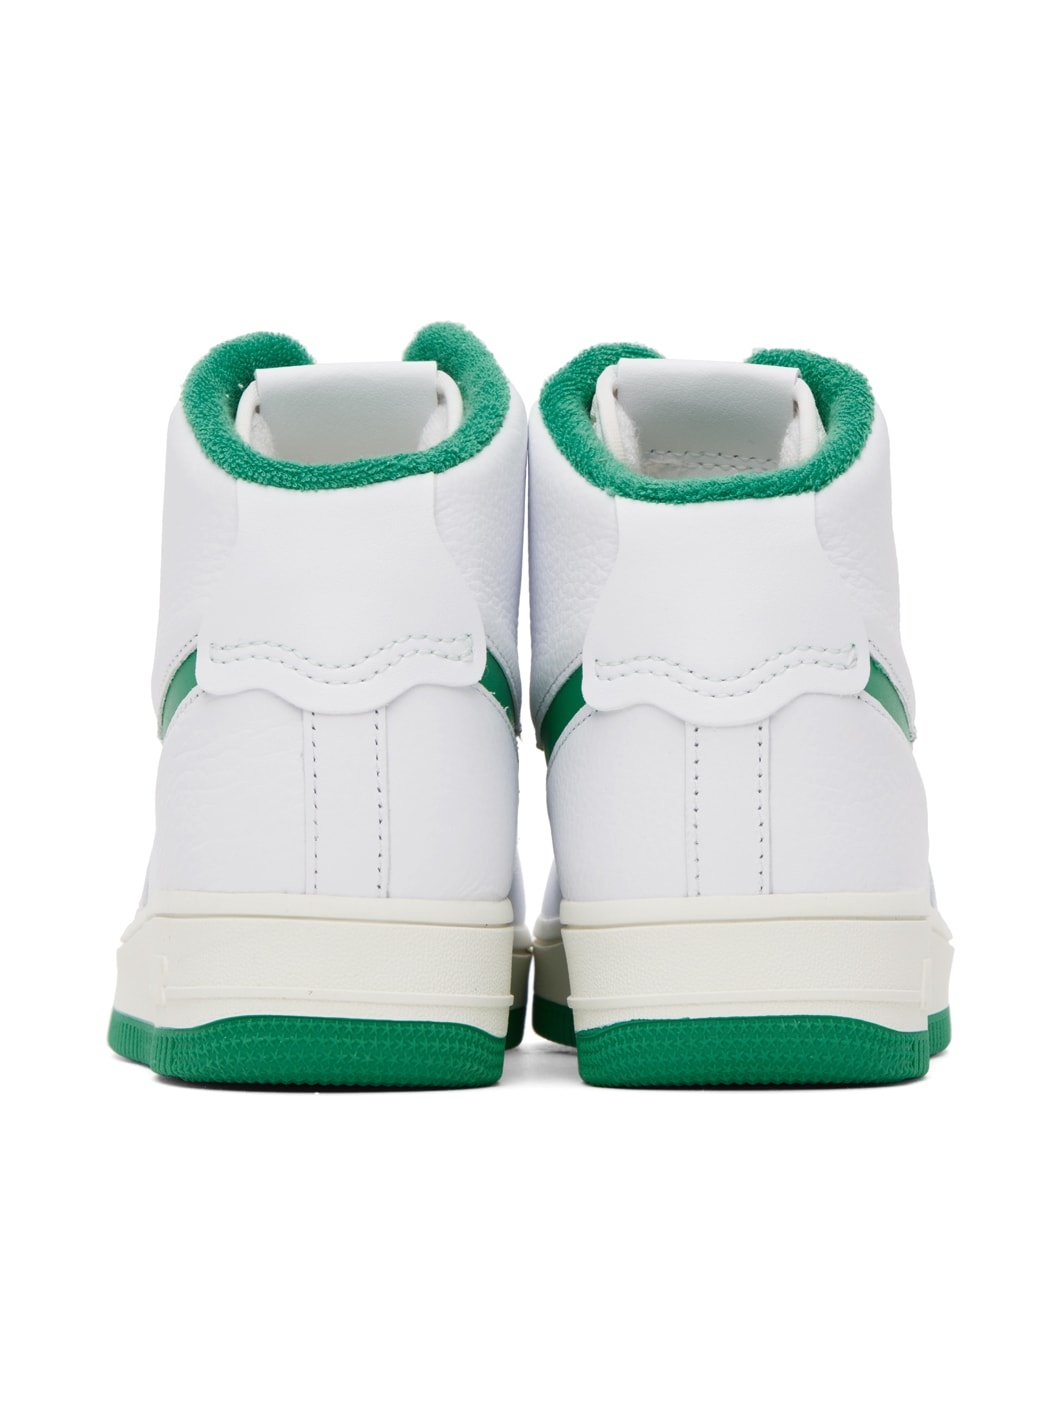 White & Green Air Force 1 Sculpt Sneakers - 2